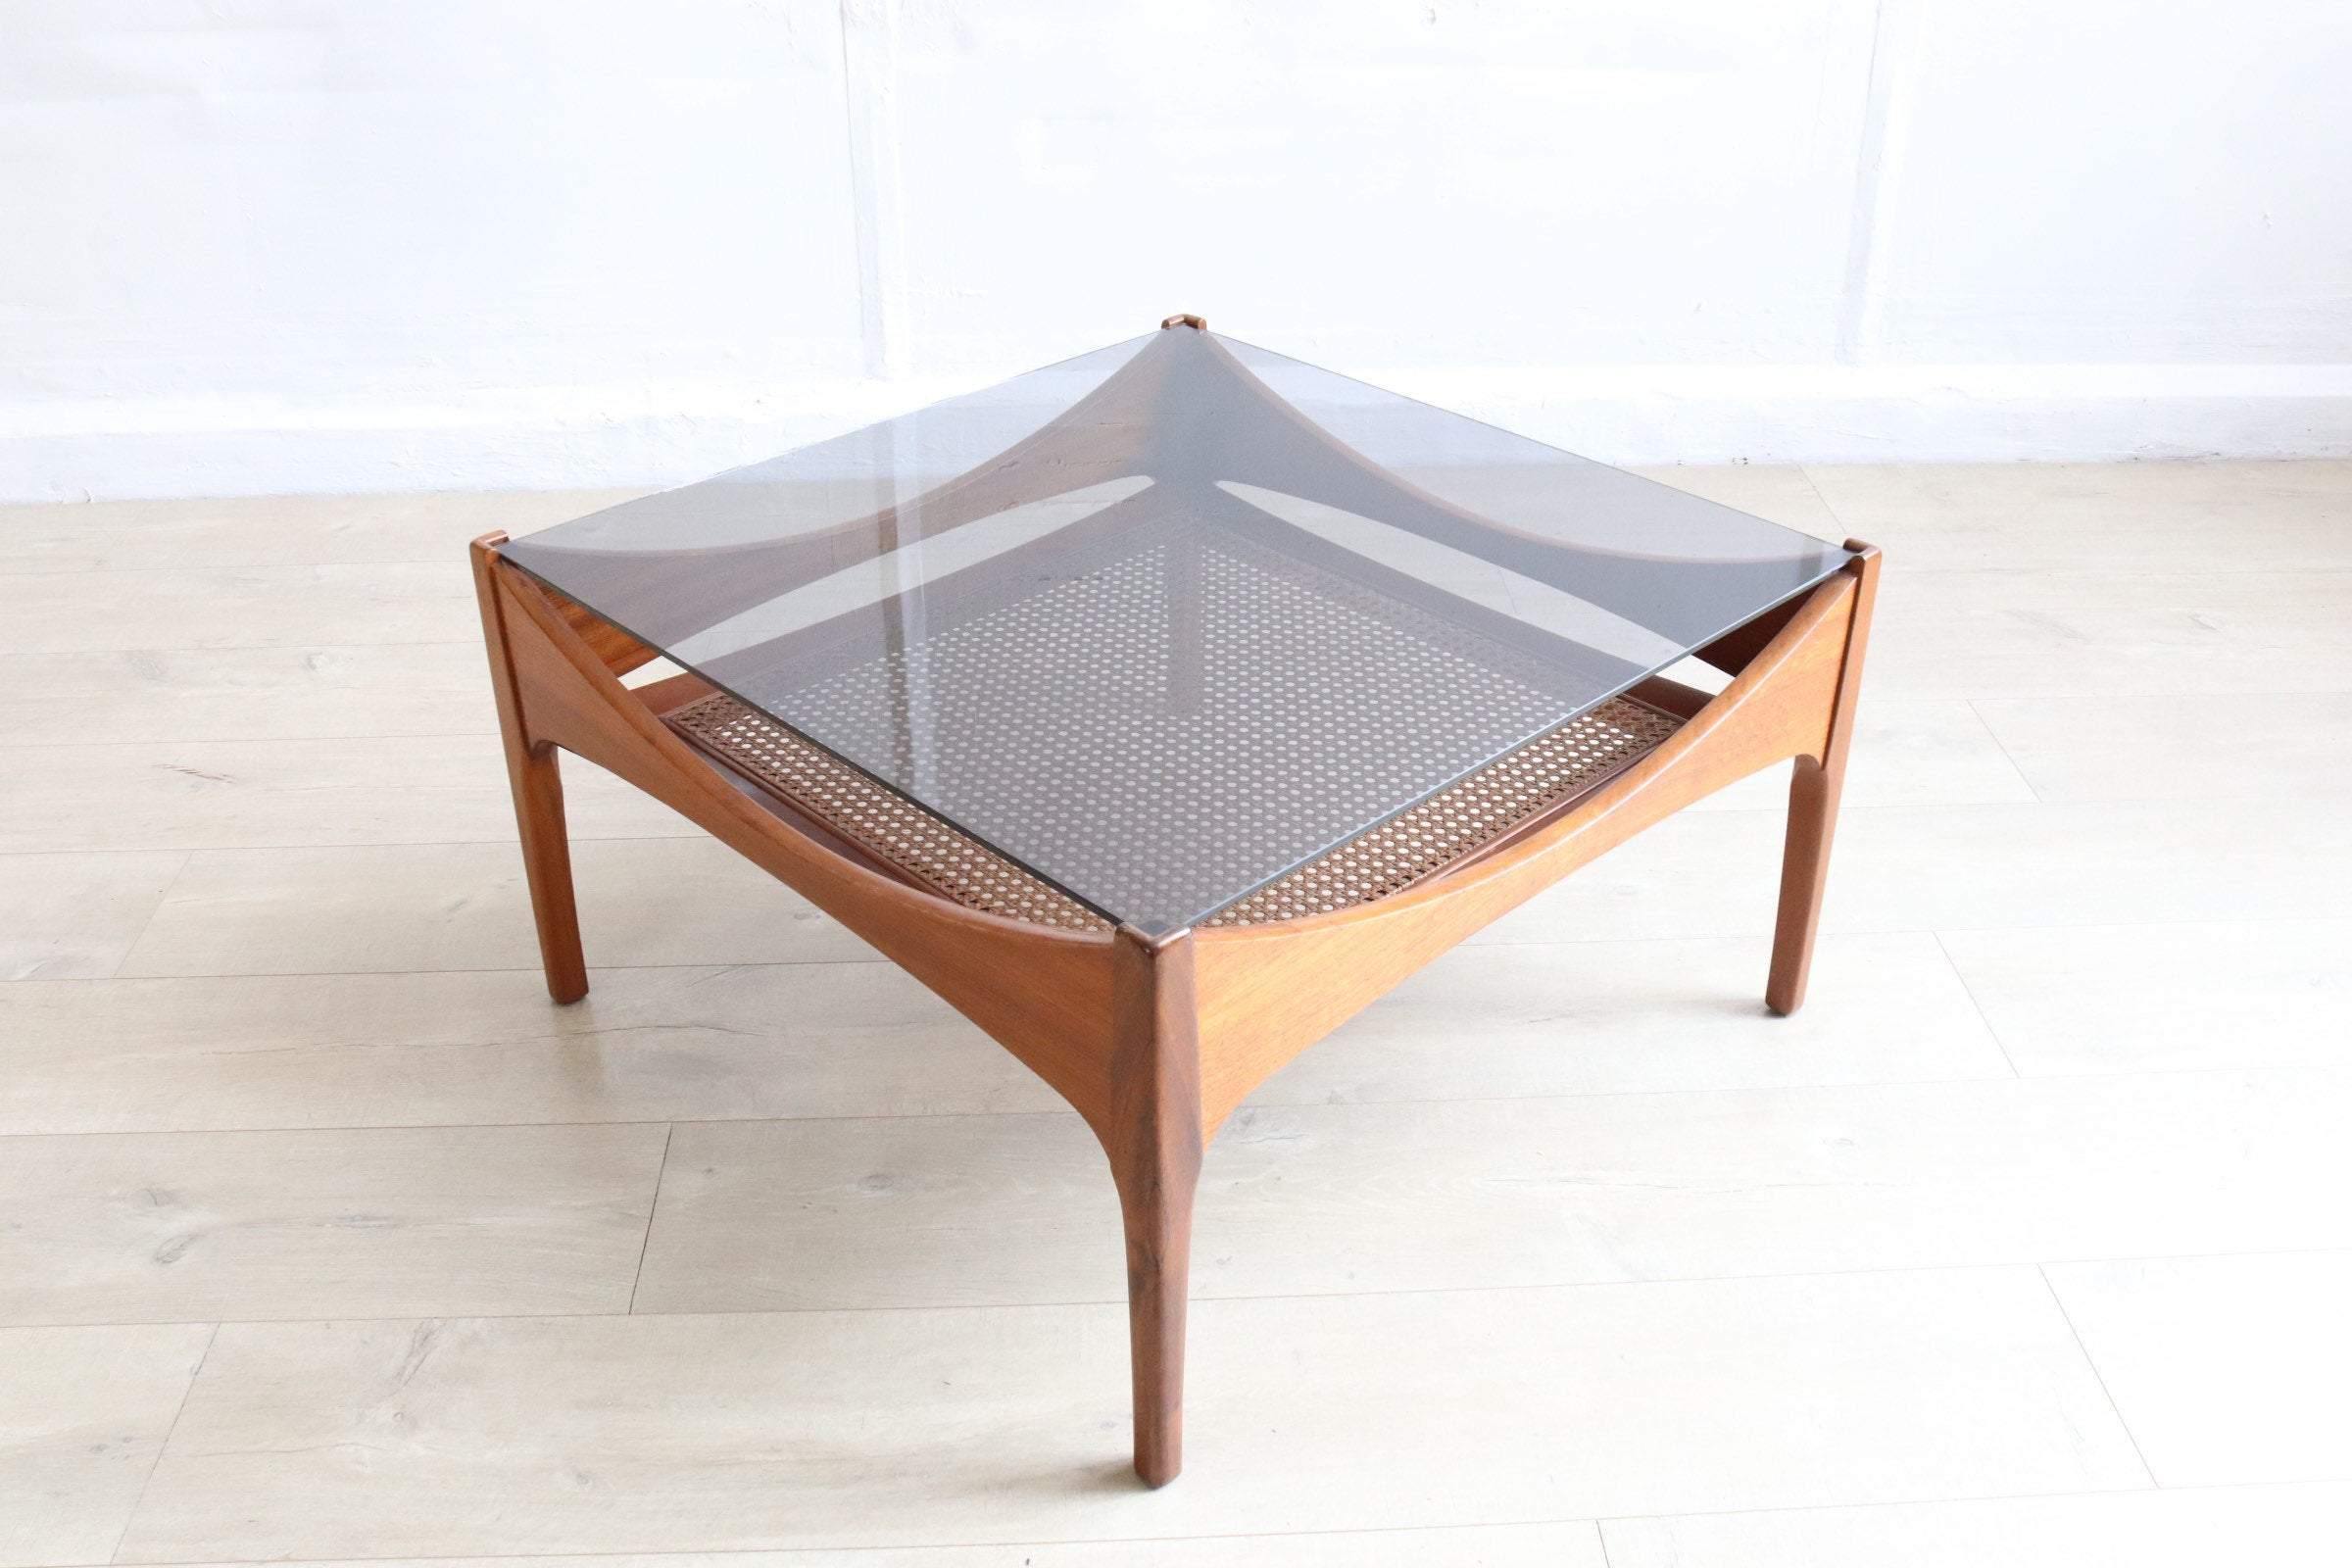 Retro Teak Coffee Table with Smoked Glass and Rattan Danish Astro Style - S Form Original Mid Century Living Room Furniture - teakyfinders